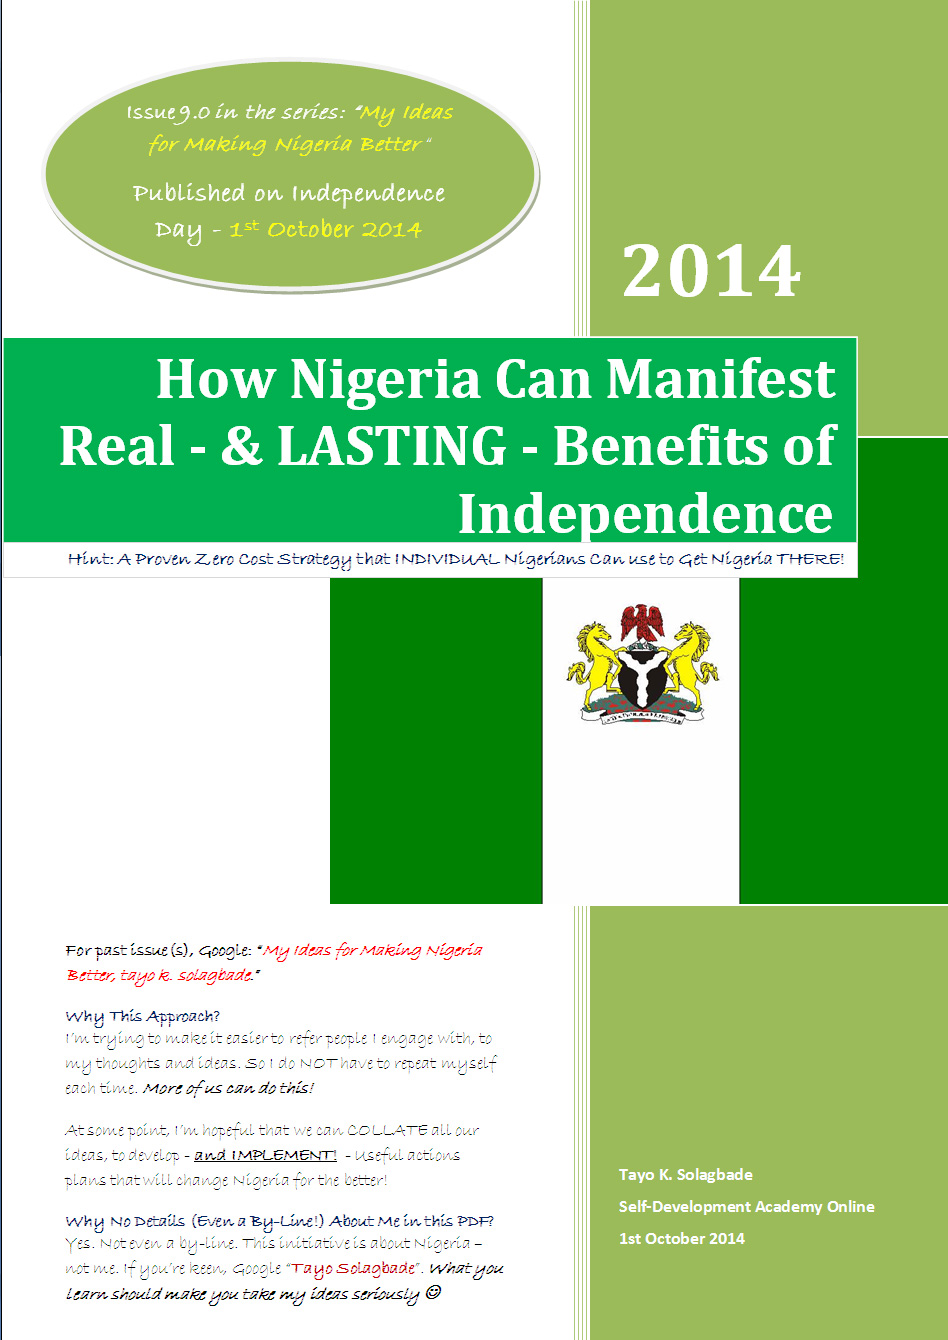 This is Issue 9.0 in the series - 'My Ideas for Making Nigeria Better' Published on Independence Day - 1st October 2014 (CLICK NOW to read full PDF)